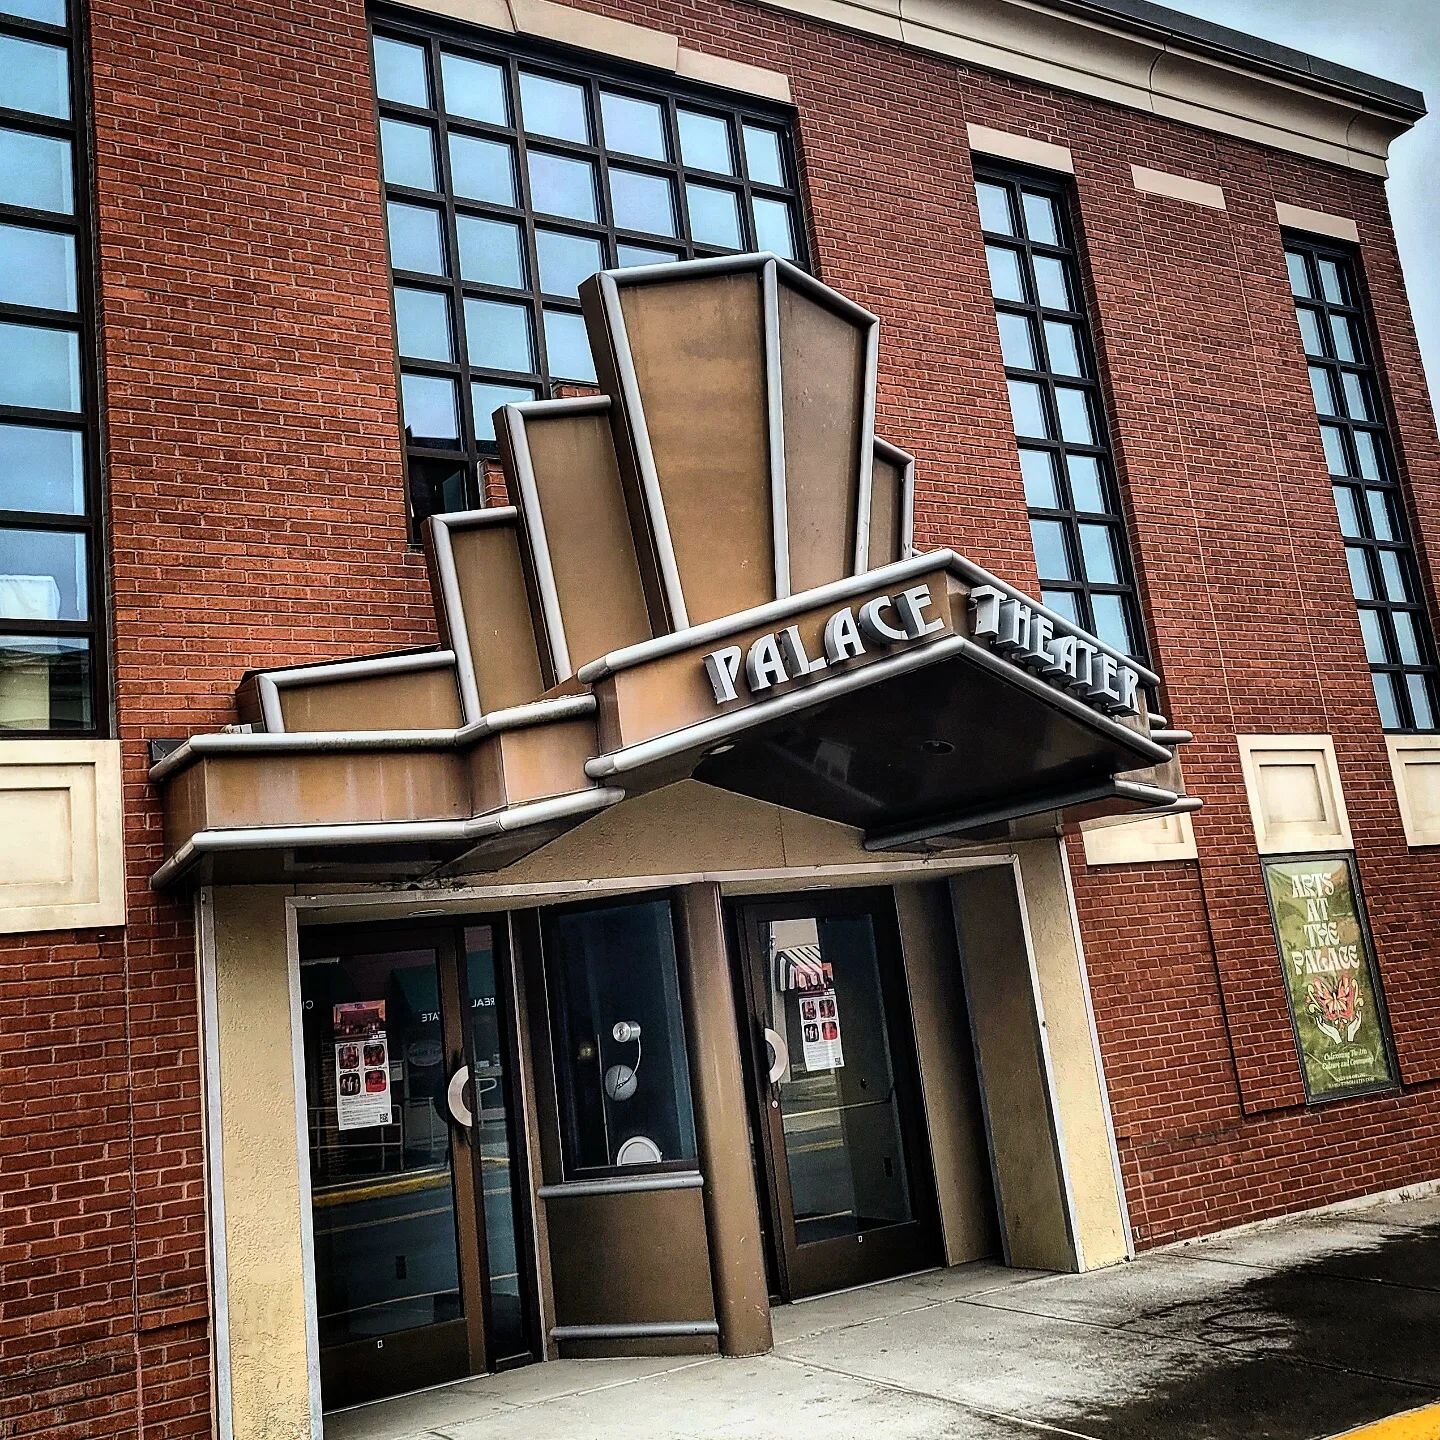 Zikrayat will be performing at this charming theater (the &quot;Palace Theater&quot; aka &quot;Arts at the Palace&quot; @hamiltoncreates in Hamilton, NY, near the campus of Colgate University tomorrow night - if you're in this region of NY (Syracuse,